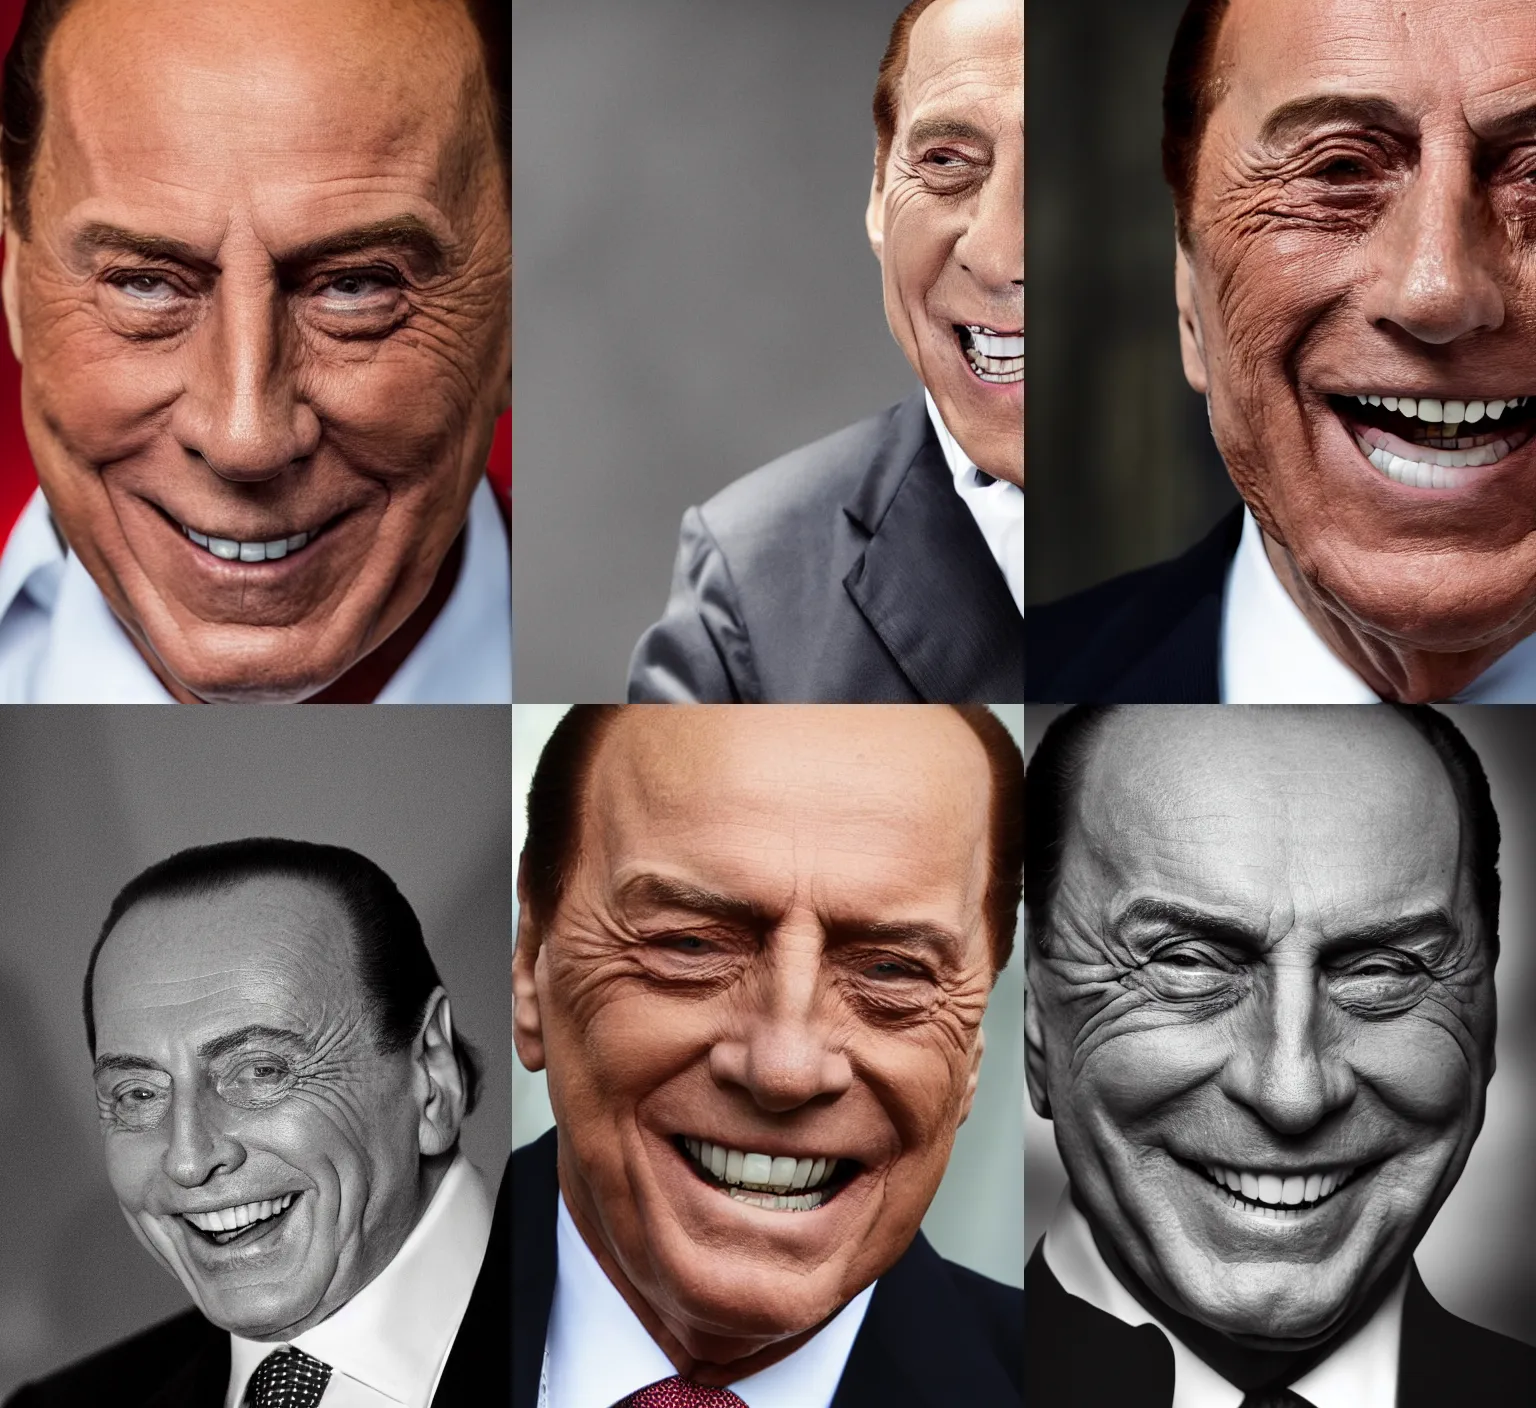 Prompt: Silvio Berlusconi is looking at you and smiling, a big scary smile from Silvio Berlusconi, close up portrait, professional photography CANON, dramatic lighting enhancing all the details from Berlusconi's face